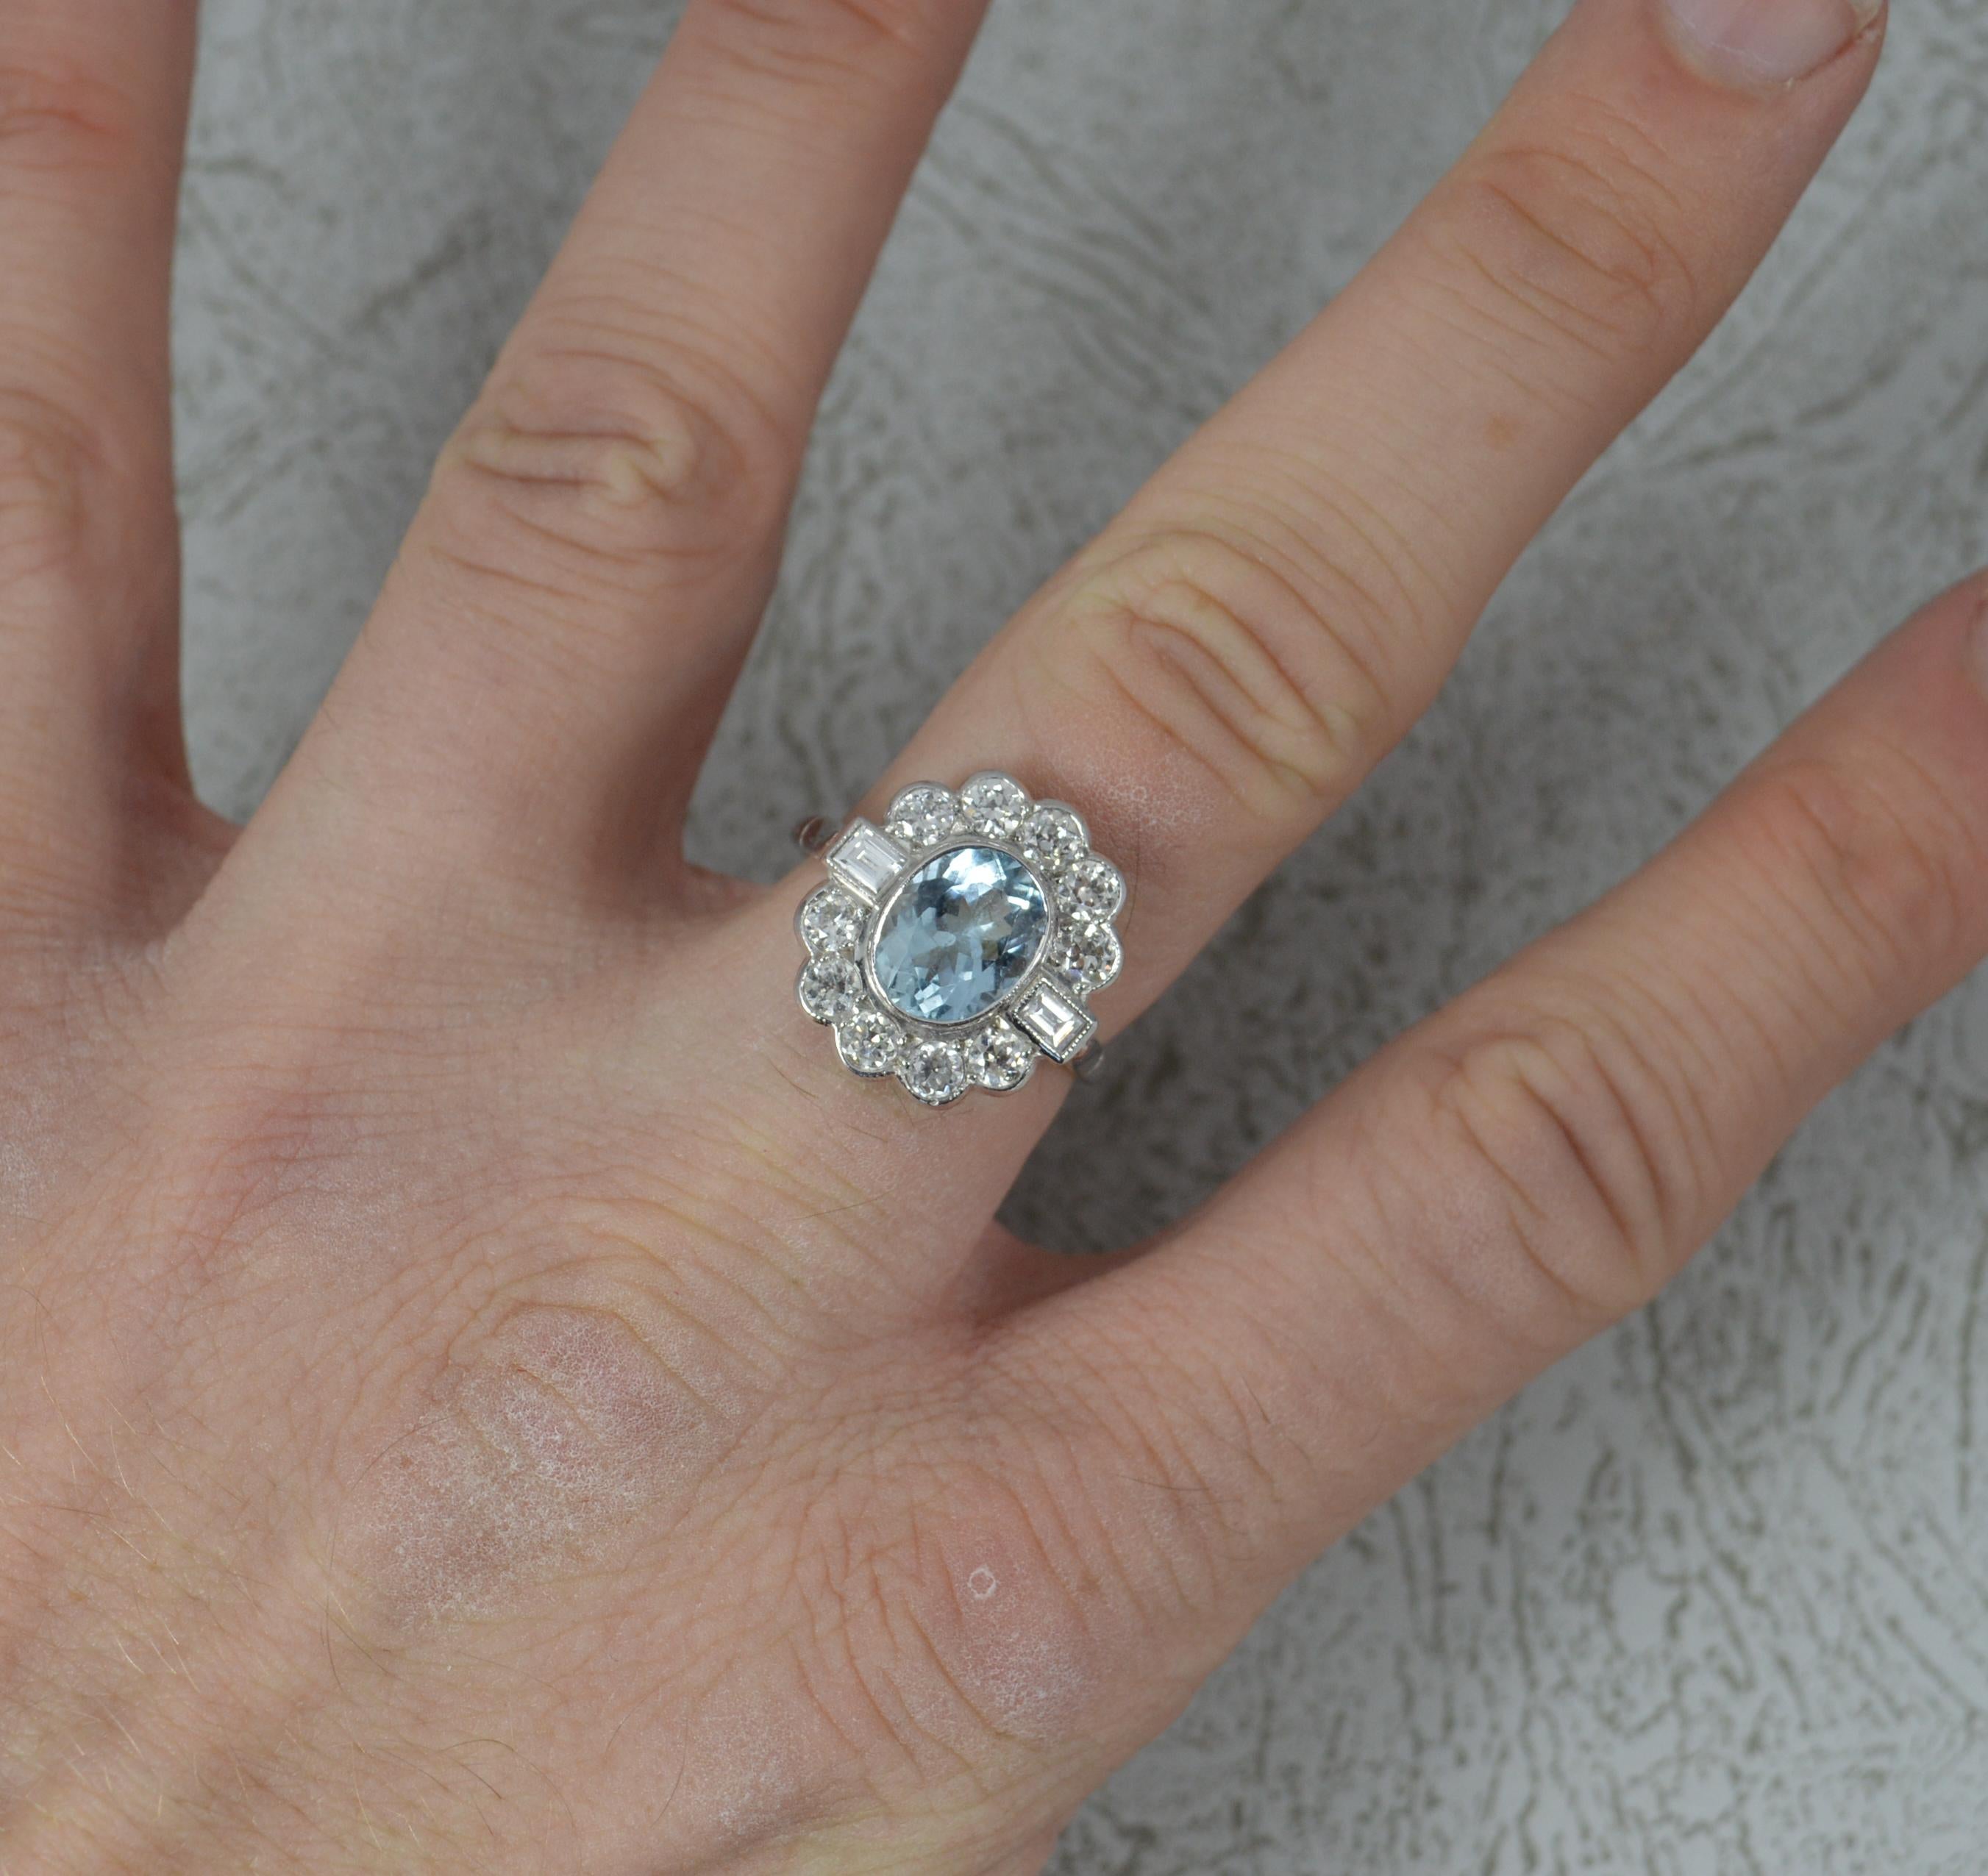 A stunning Aquamarine and Diamond cluster ring.
​Solid 18 carat white gold shank and setting.
Designed with an oval cut aquamarine to the centre in collet setting. 7.4mm x 9.2mm approx.
Surrounding are 10 natural old cut diamonds and 2 emerald cut